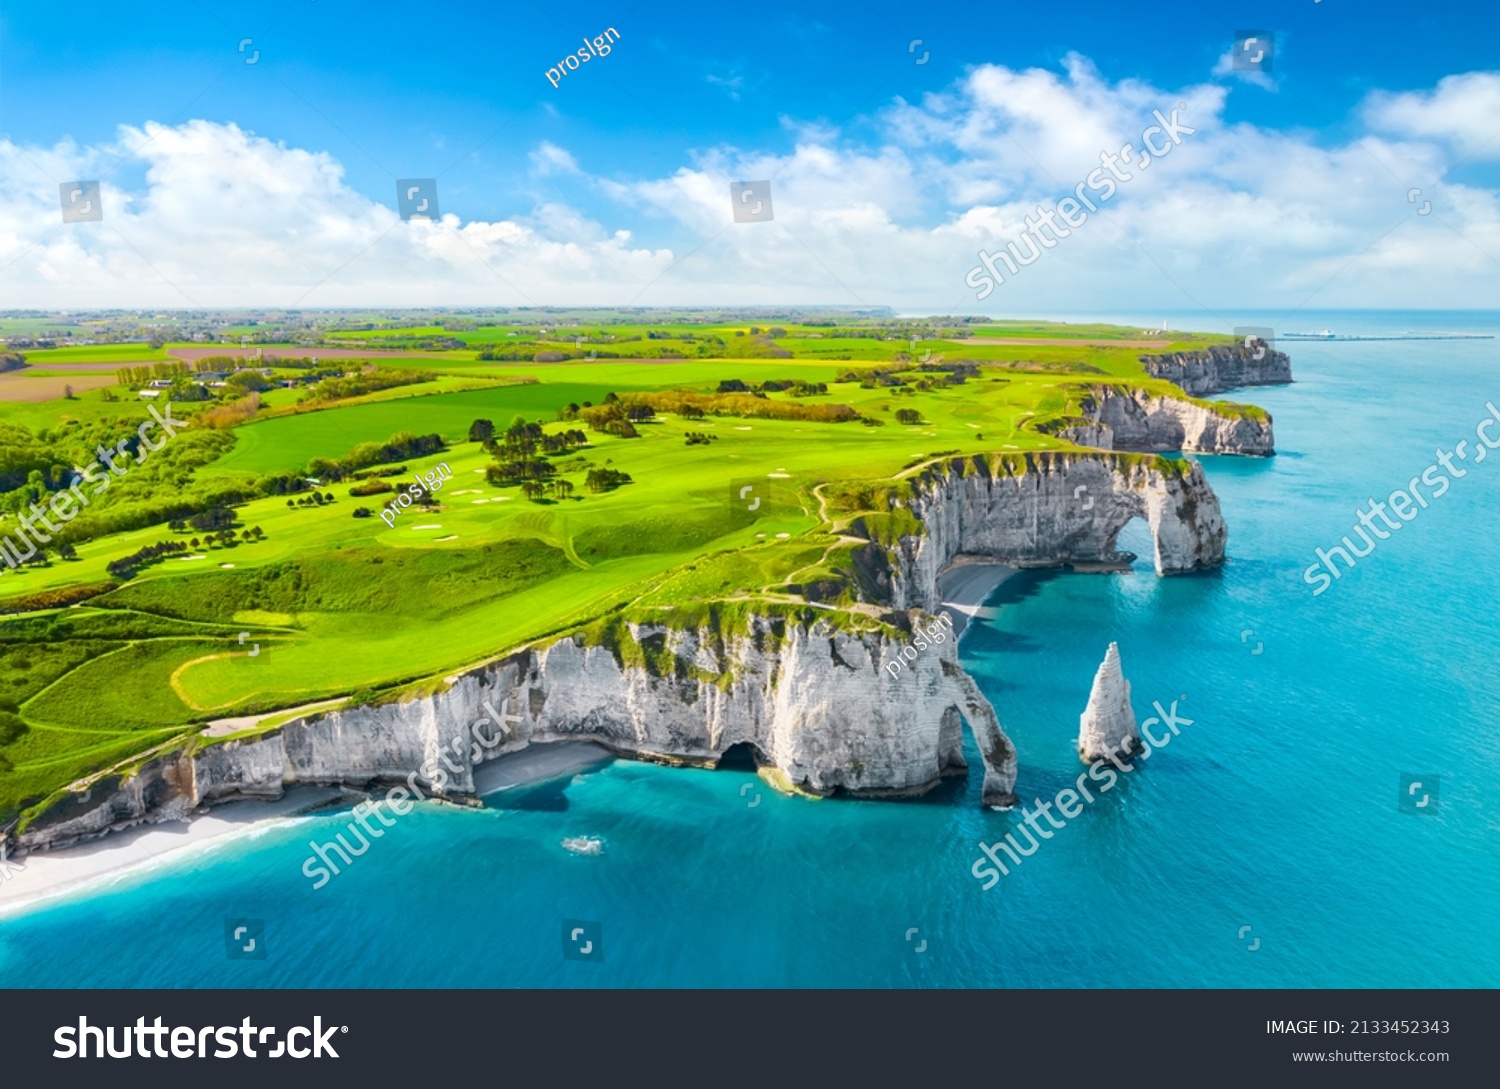 Aerial view of the beautiful cliffs of Etretat. Normandy, France, La Manche or English Channel #2133452343